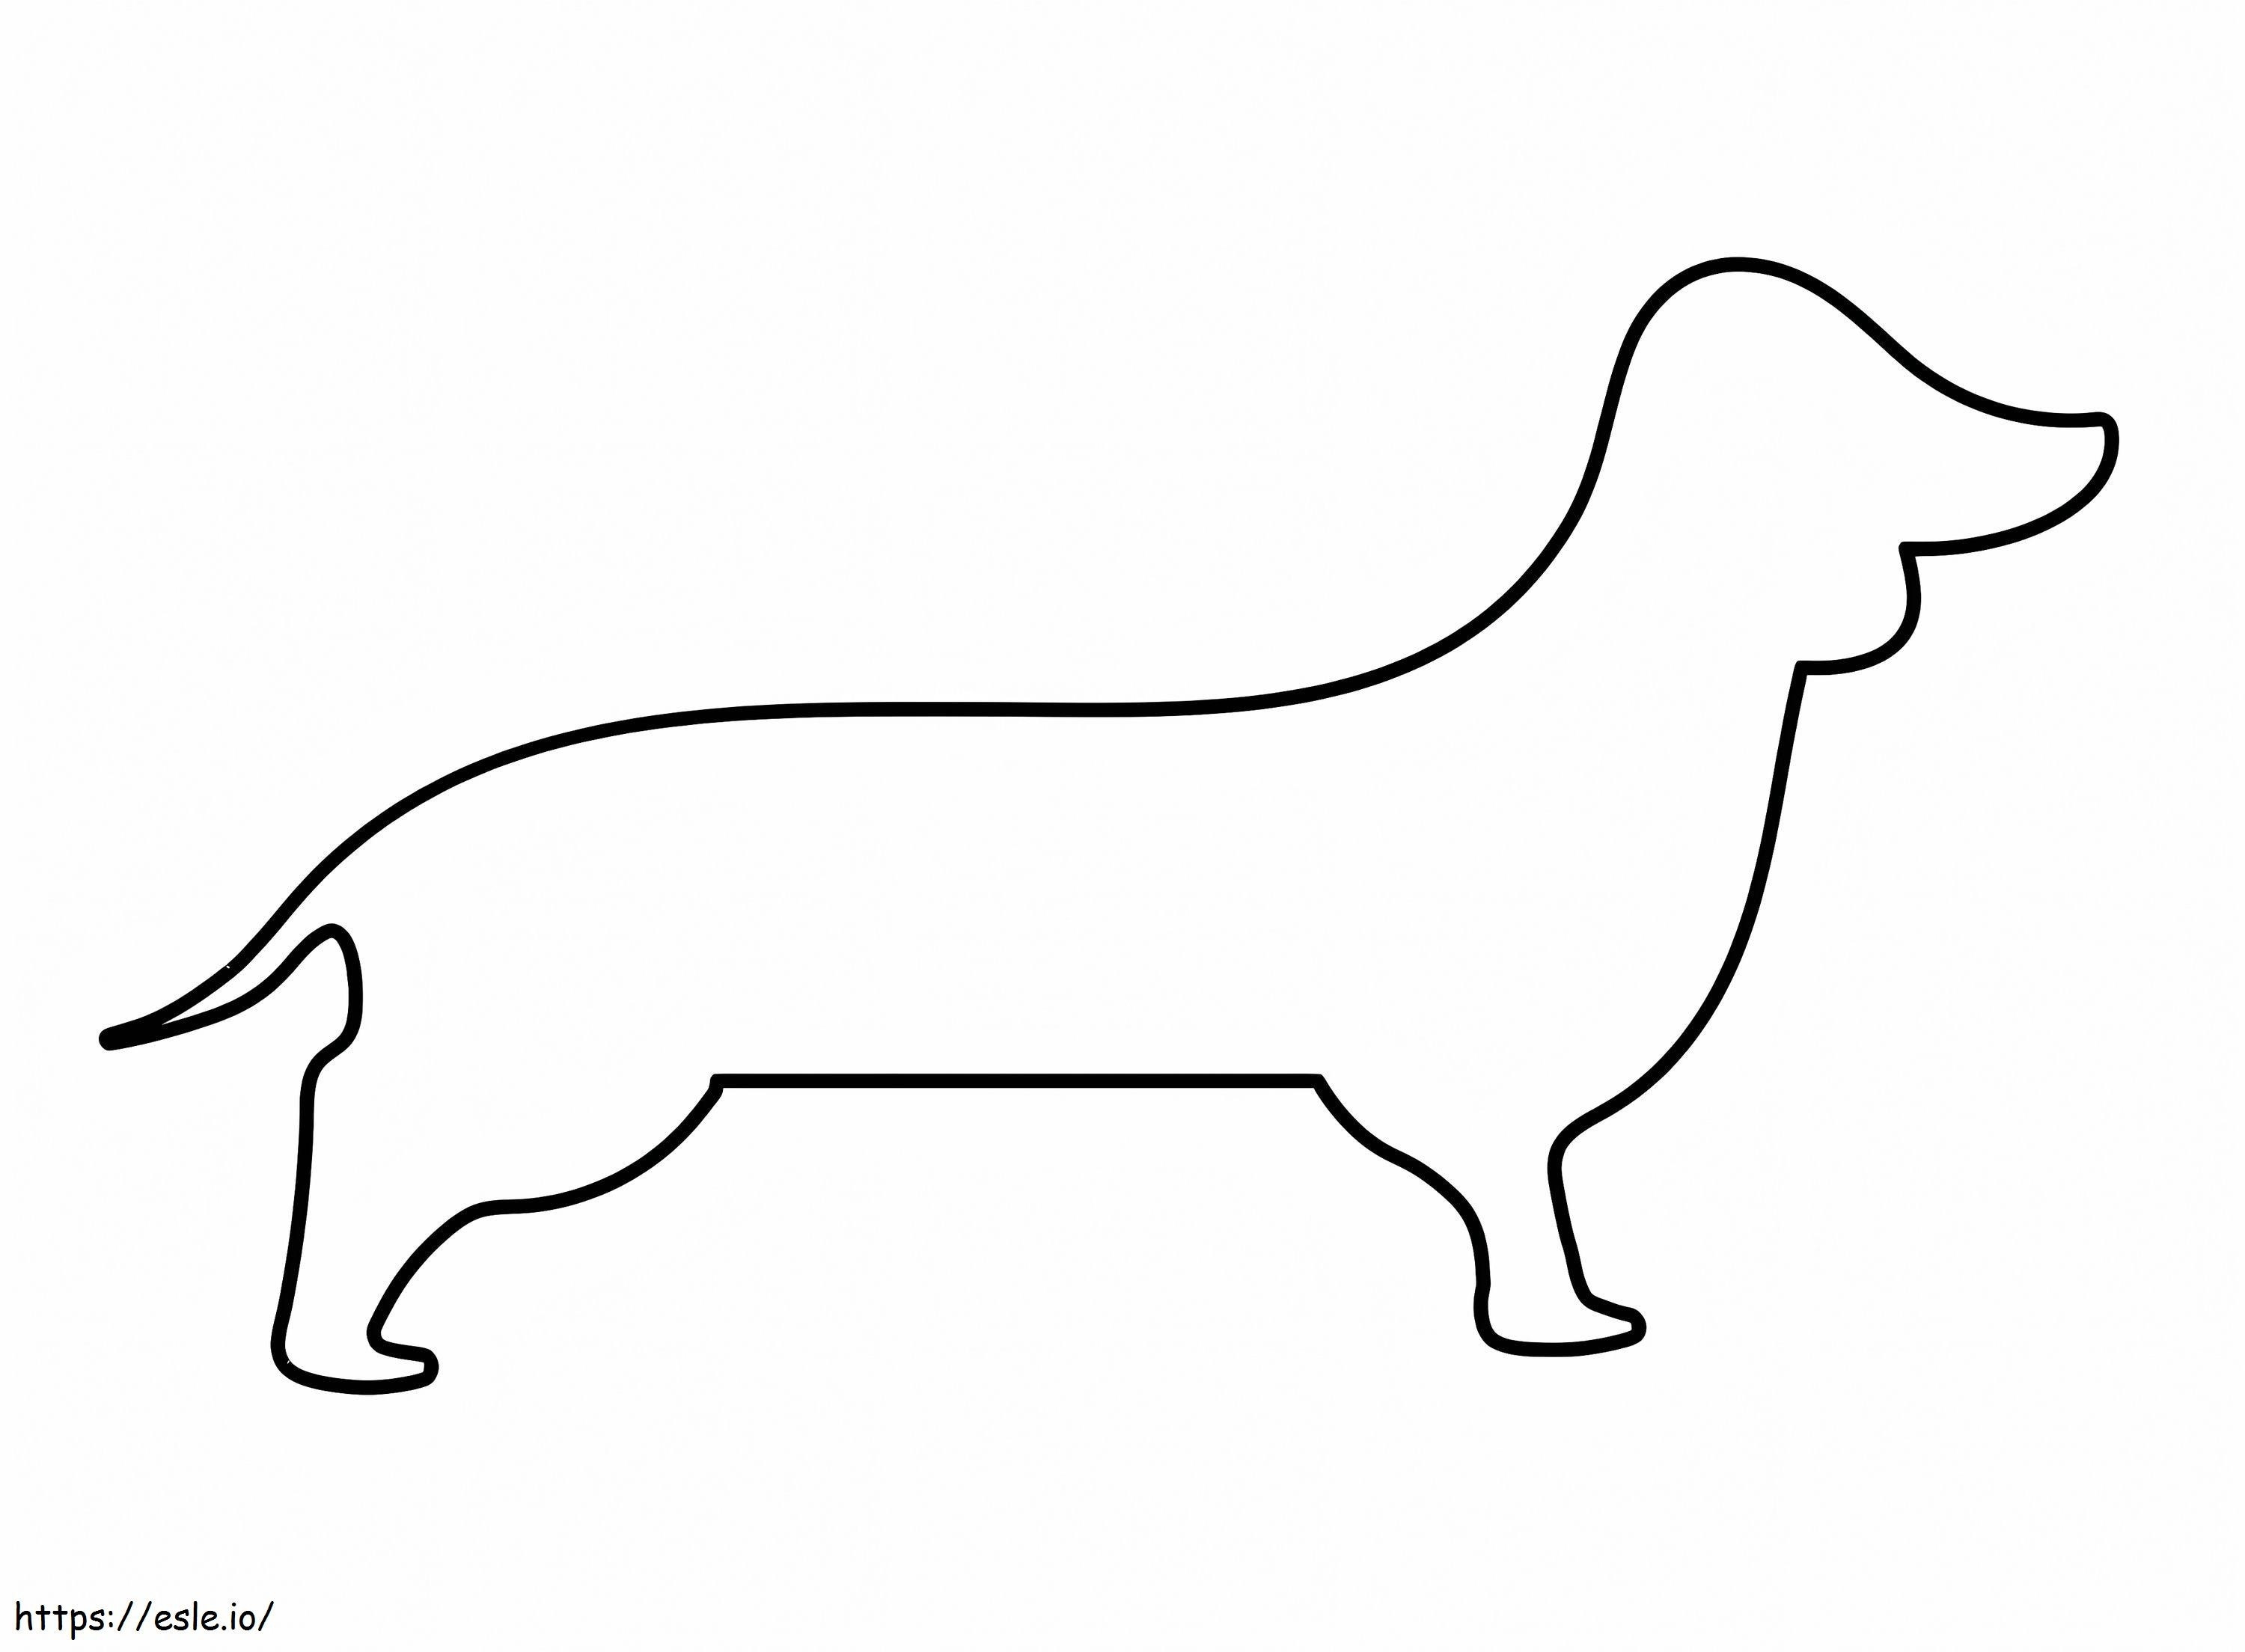 Dachshund Outline 1 coloring page